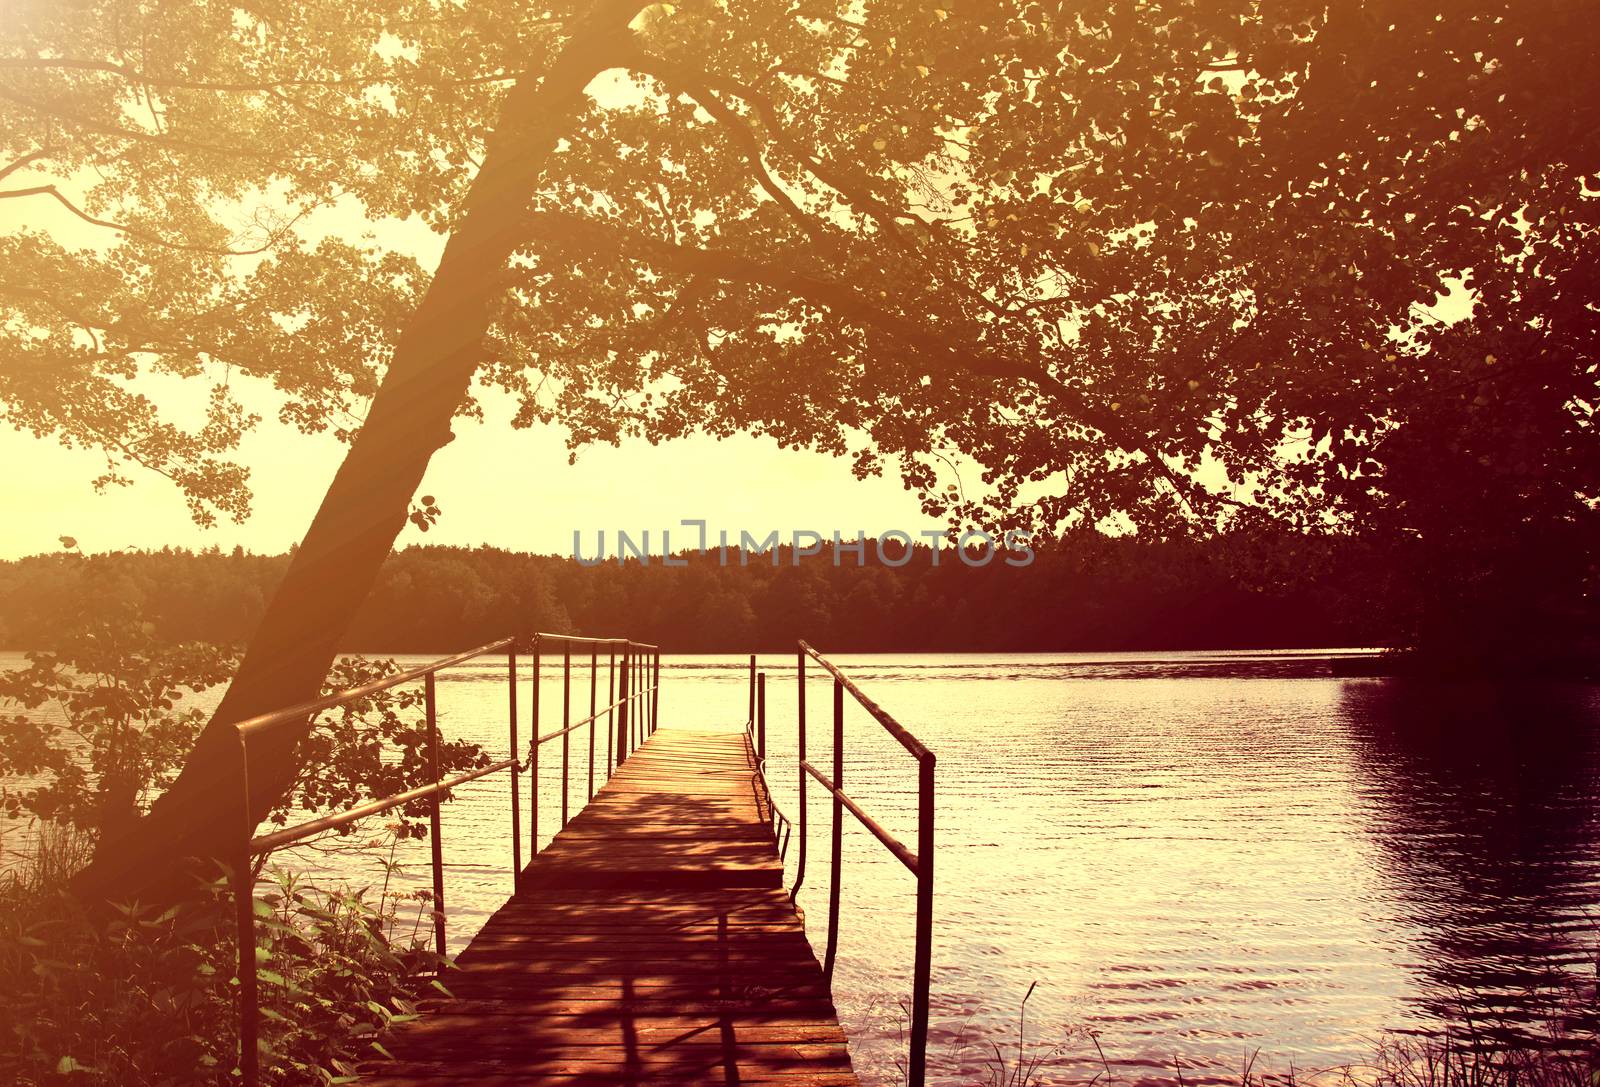 Evening on the lake at summer. Instagram vintage picture.